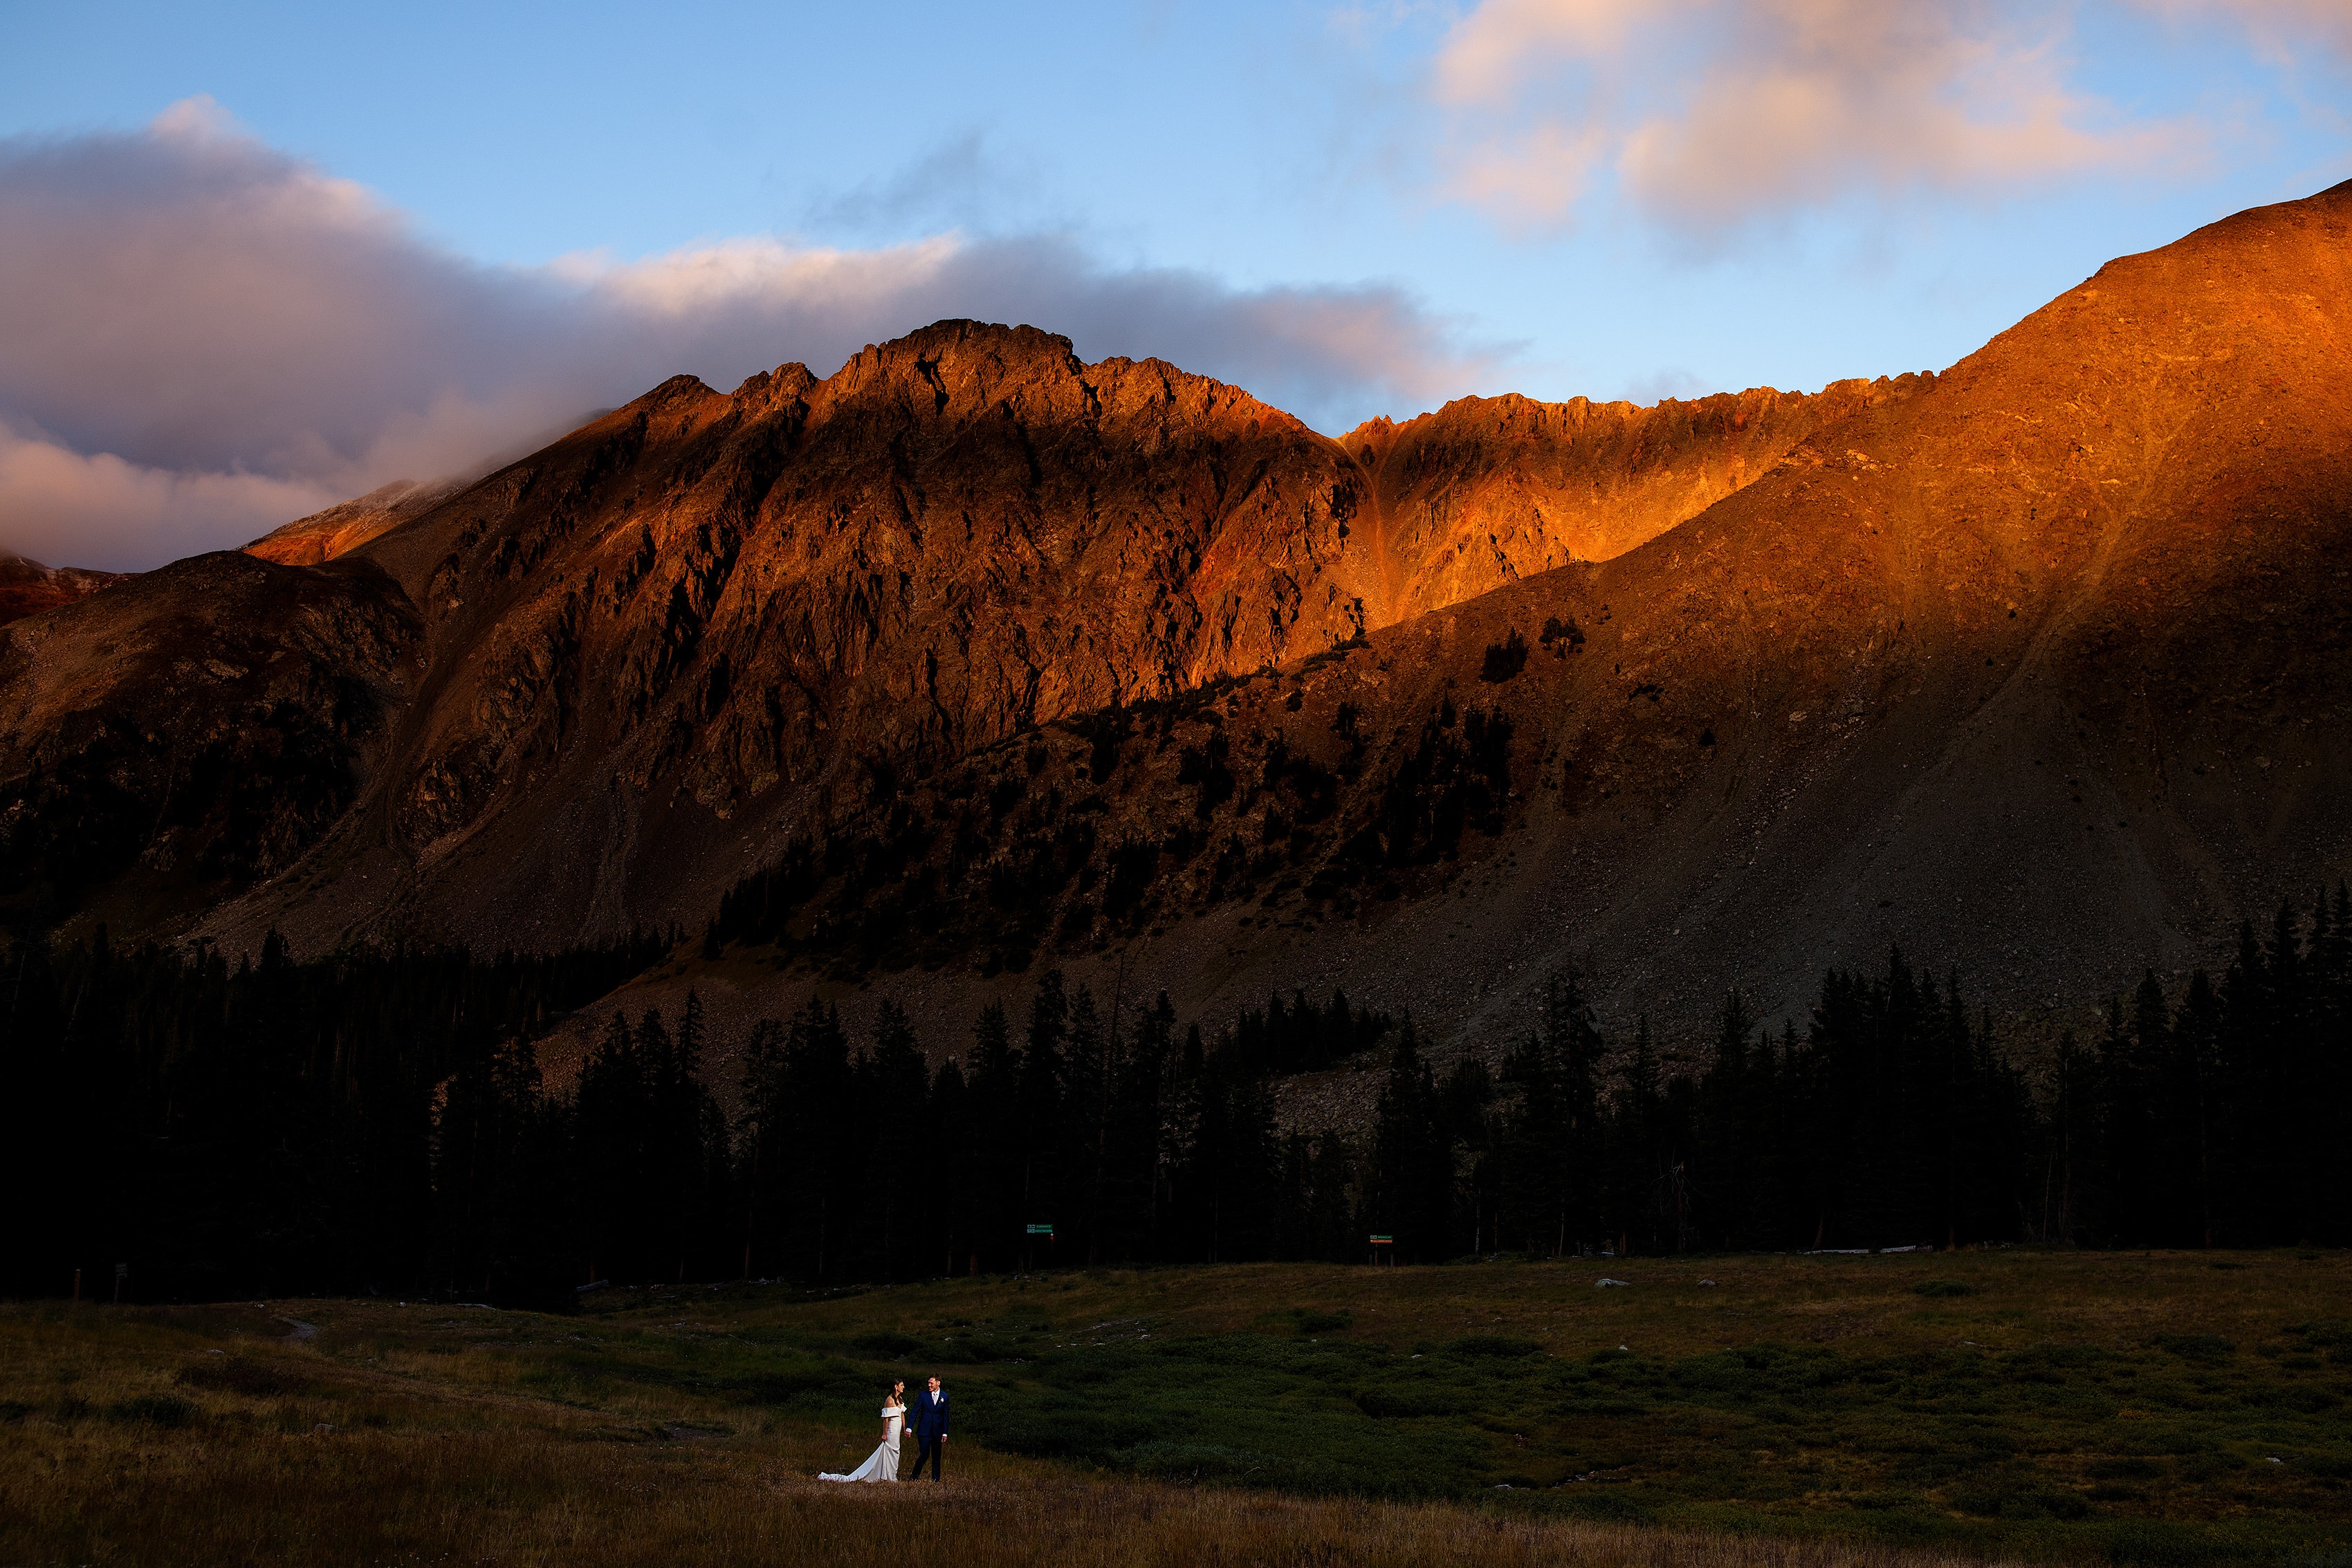 Heather and Stephen pose together as alpenglow illuminates the East Wall at Arapahoe Basin during their wedding day